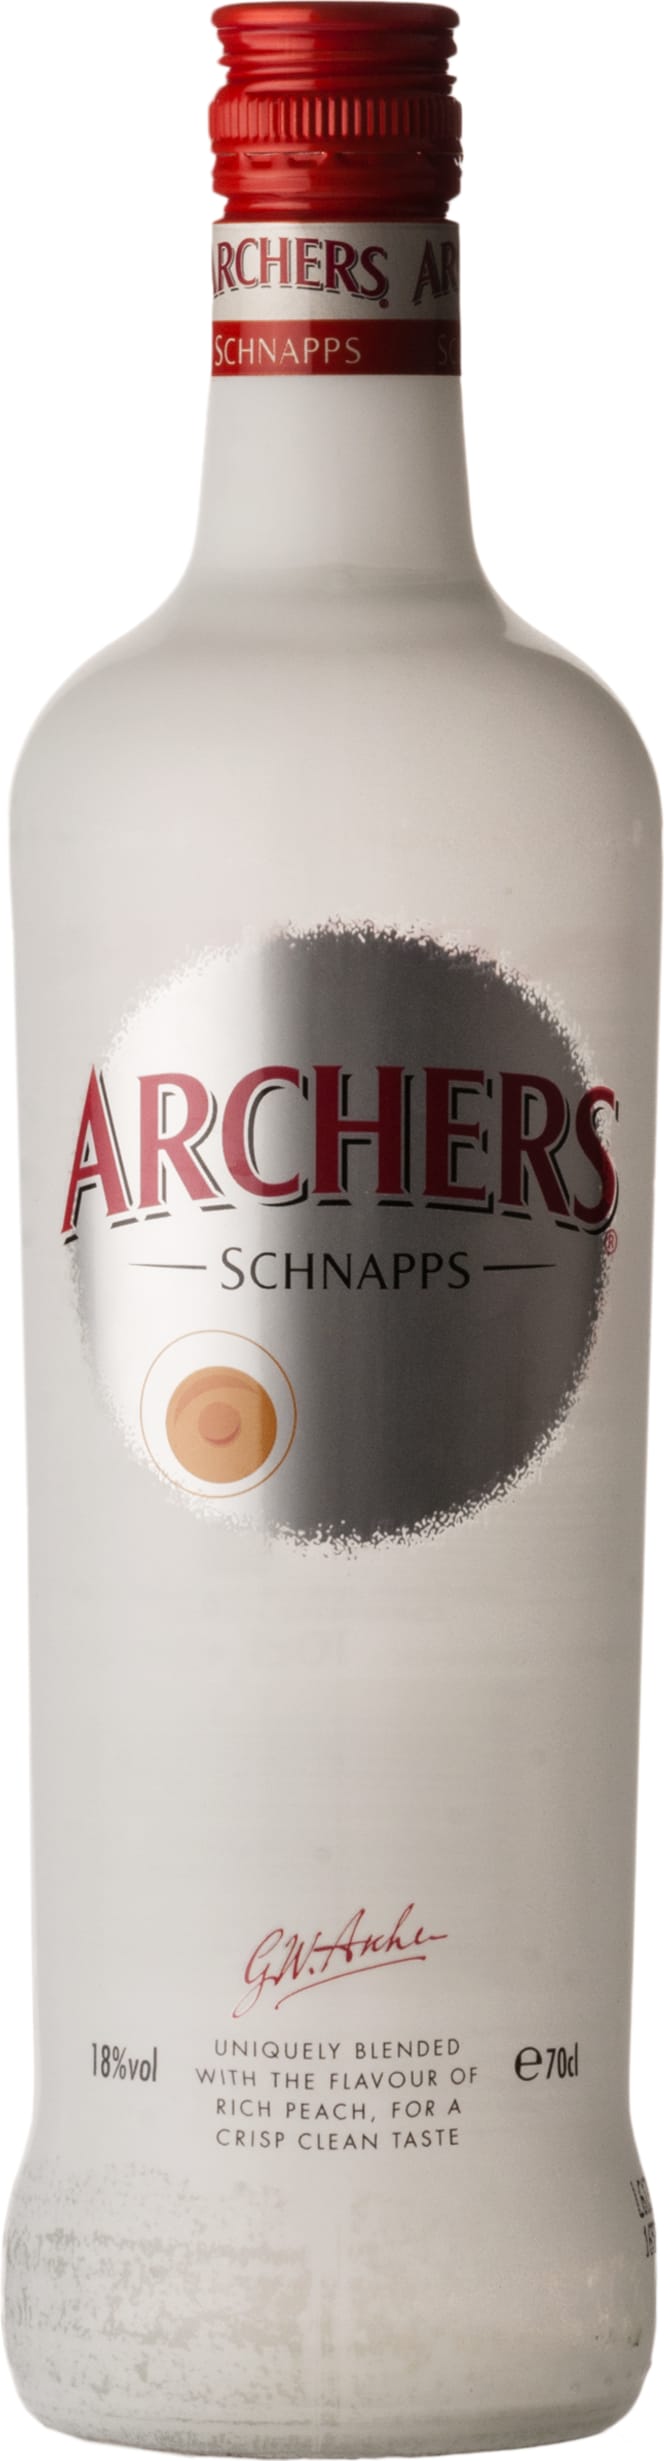 Archers Peach Schnapps 70cl NV - Buy Archers Wines from GREAT WINES DIRECT wine shop